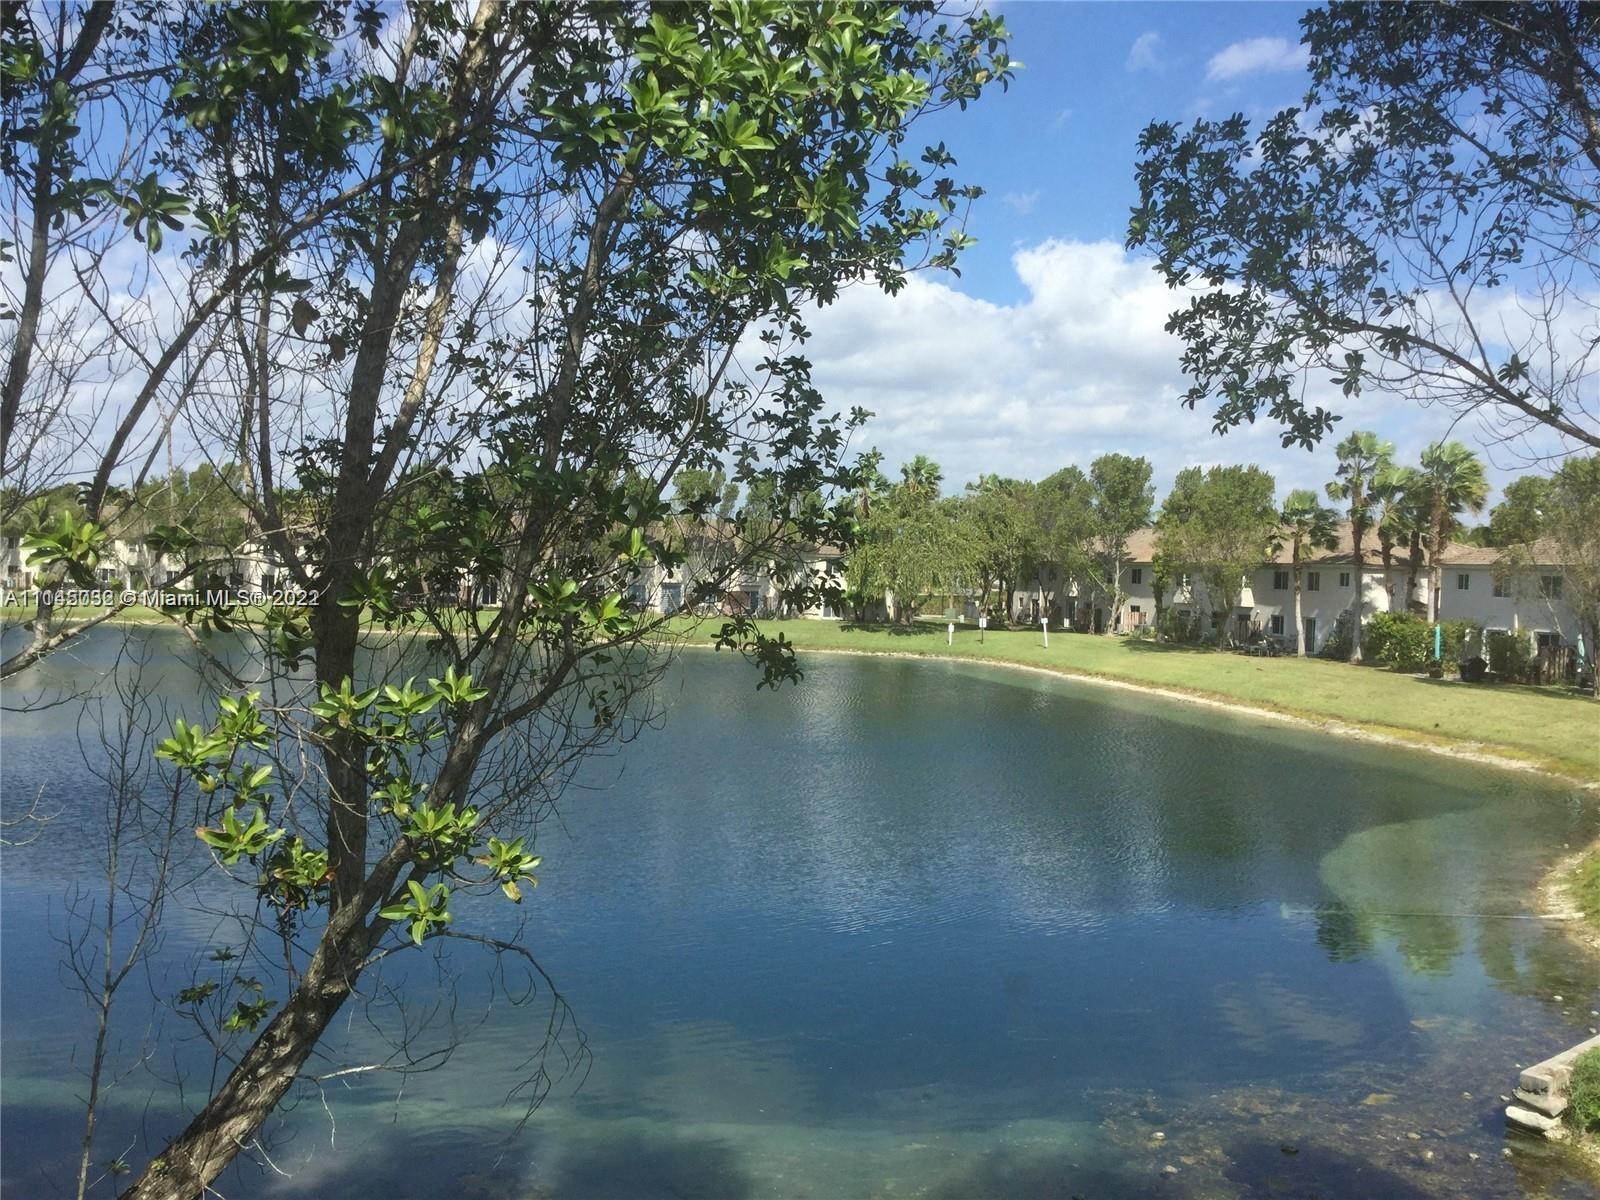 This 2 bedroom 2 bath condo in the beautiful and peaceful gated community of Venetia Gardens II could be your home. Tile throughout the living area and wood floors in the bedrooms. Washer and dryer inside unit. Close to Baptist hospital, Turnpike. Must See! easy to show on lock box.

Agents please read Broker Remarks!!